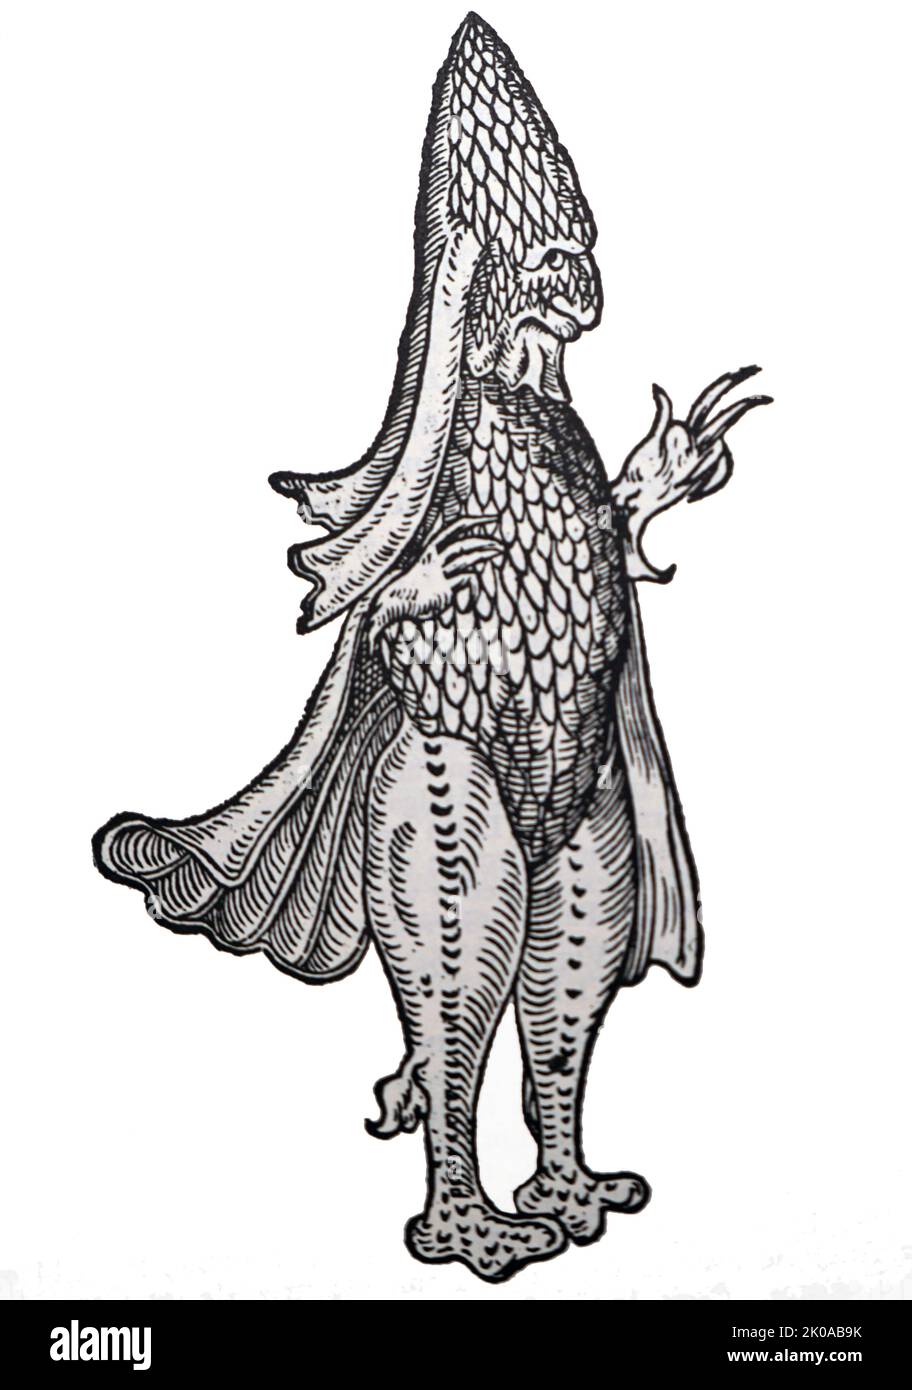 The sea monk (monk-fish or monkfish) was a sea creature found off the eastern coast of the Danish island of Zealand in 1546. It was described as a 'fish' that outwardly resembled a human monk in his habit. Rondelet's sea monk (1554) called it 'the fish with the habit of a monk (piscis monachi habitu); he classed it as a merman (homo maris) Stock Photo